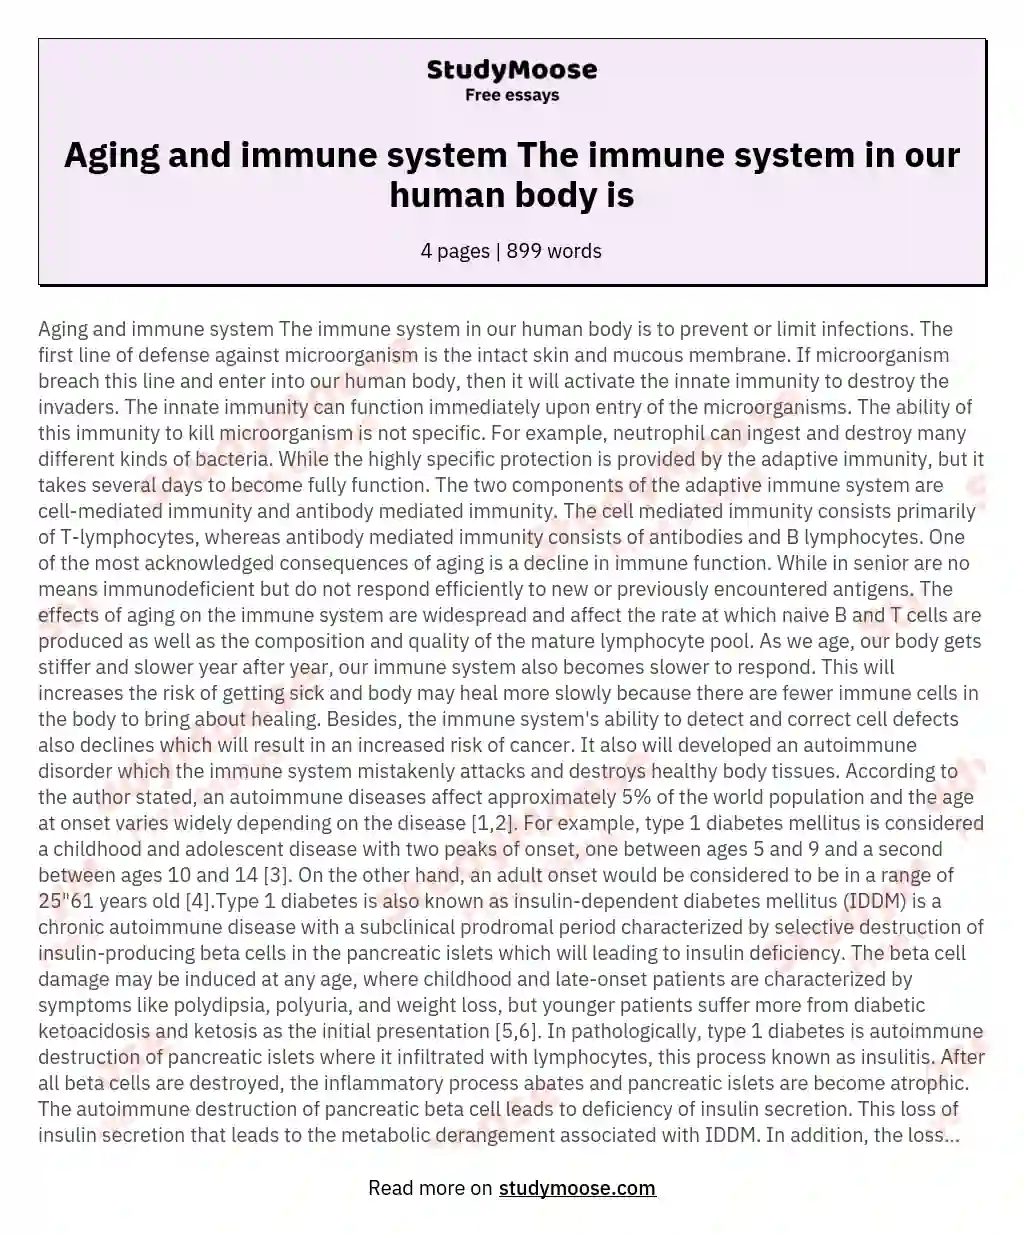 Aging and immune system The immune system in our human body is essay